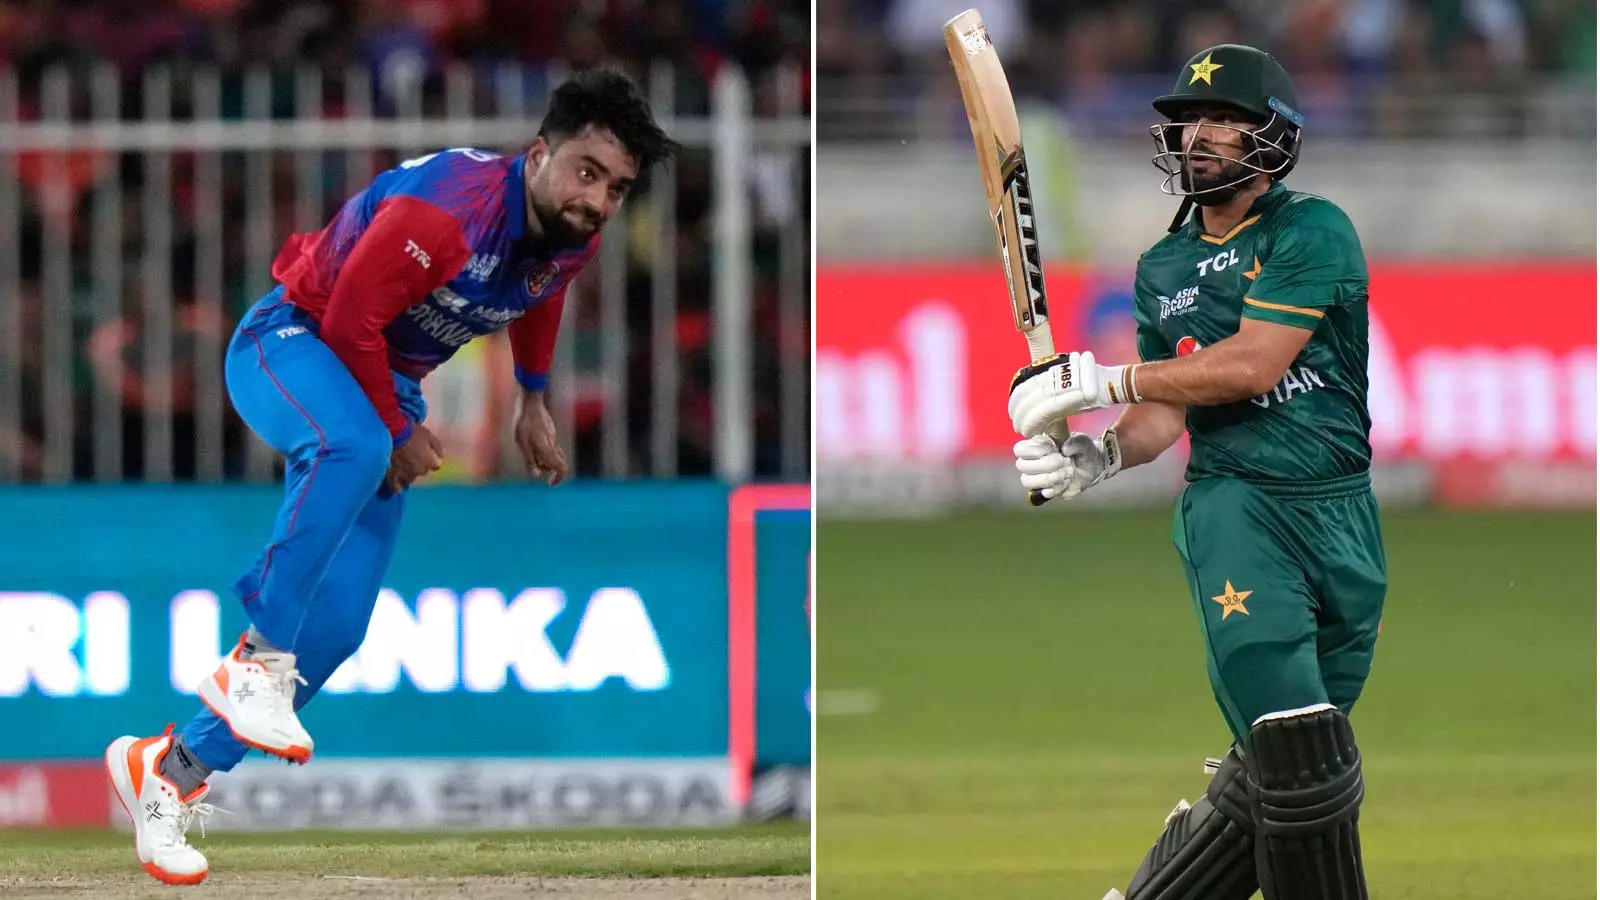 PAK vs AFG Asia Cup 2022 live streaming: When and where to watch Pakistan  vs Afghanistan match online?